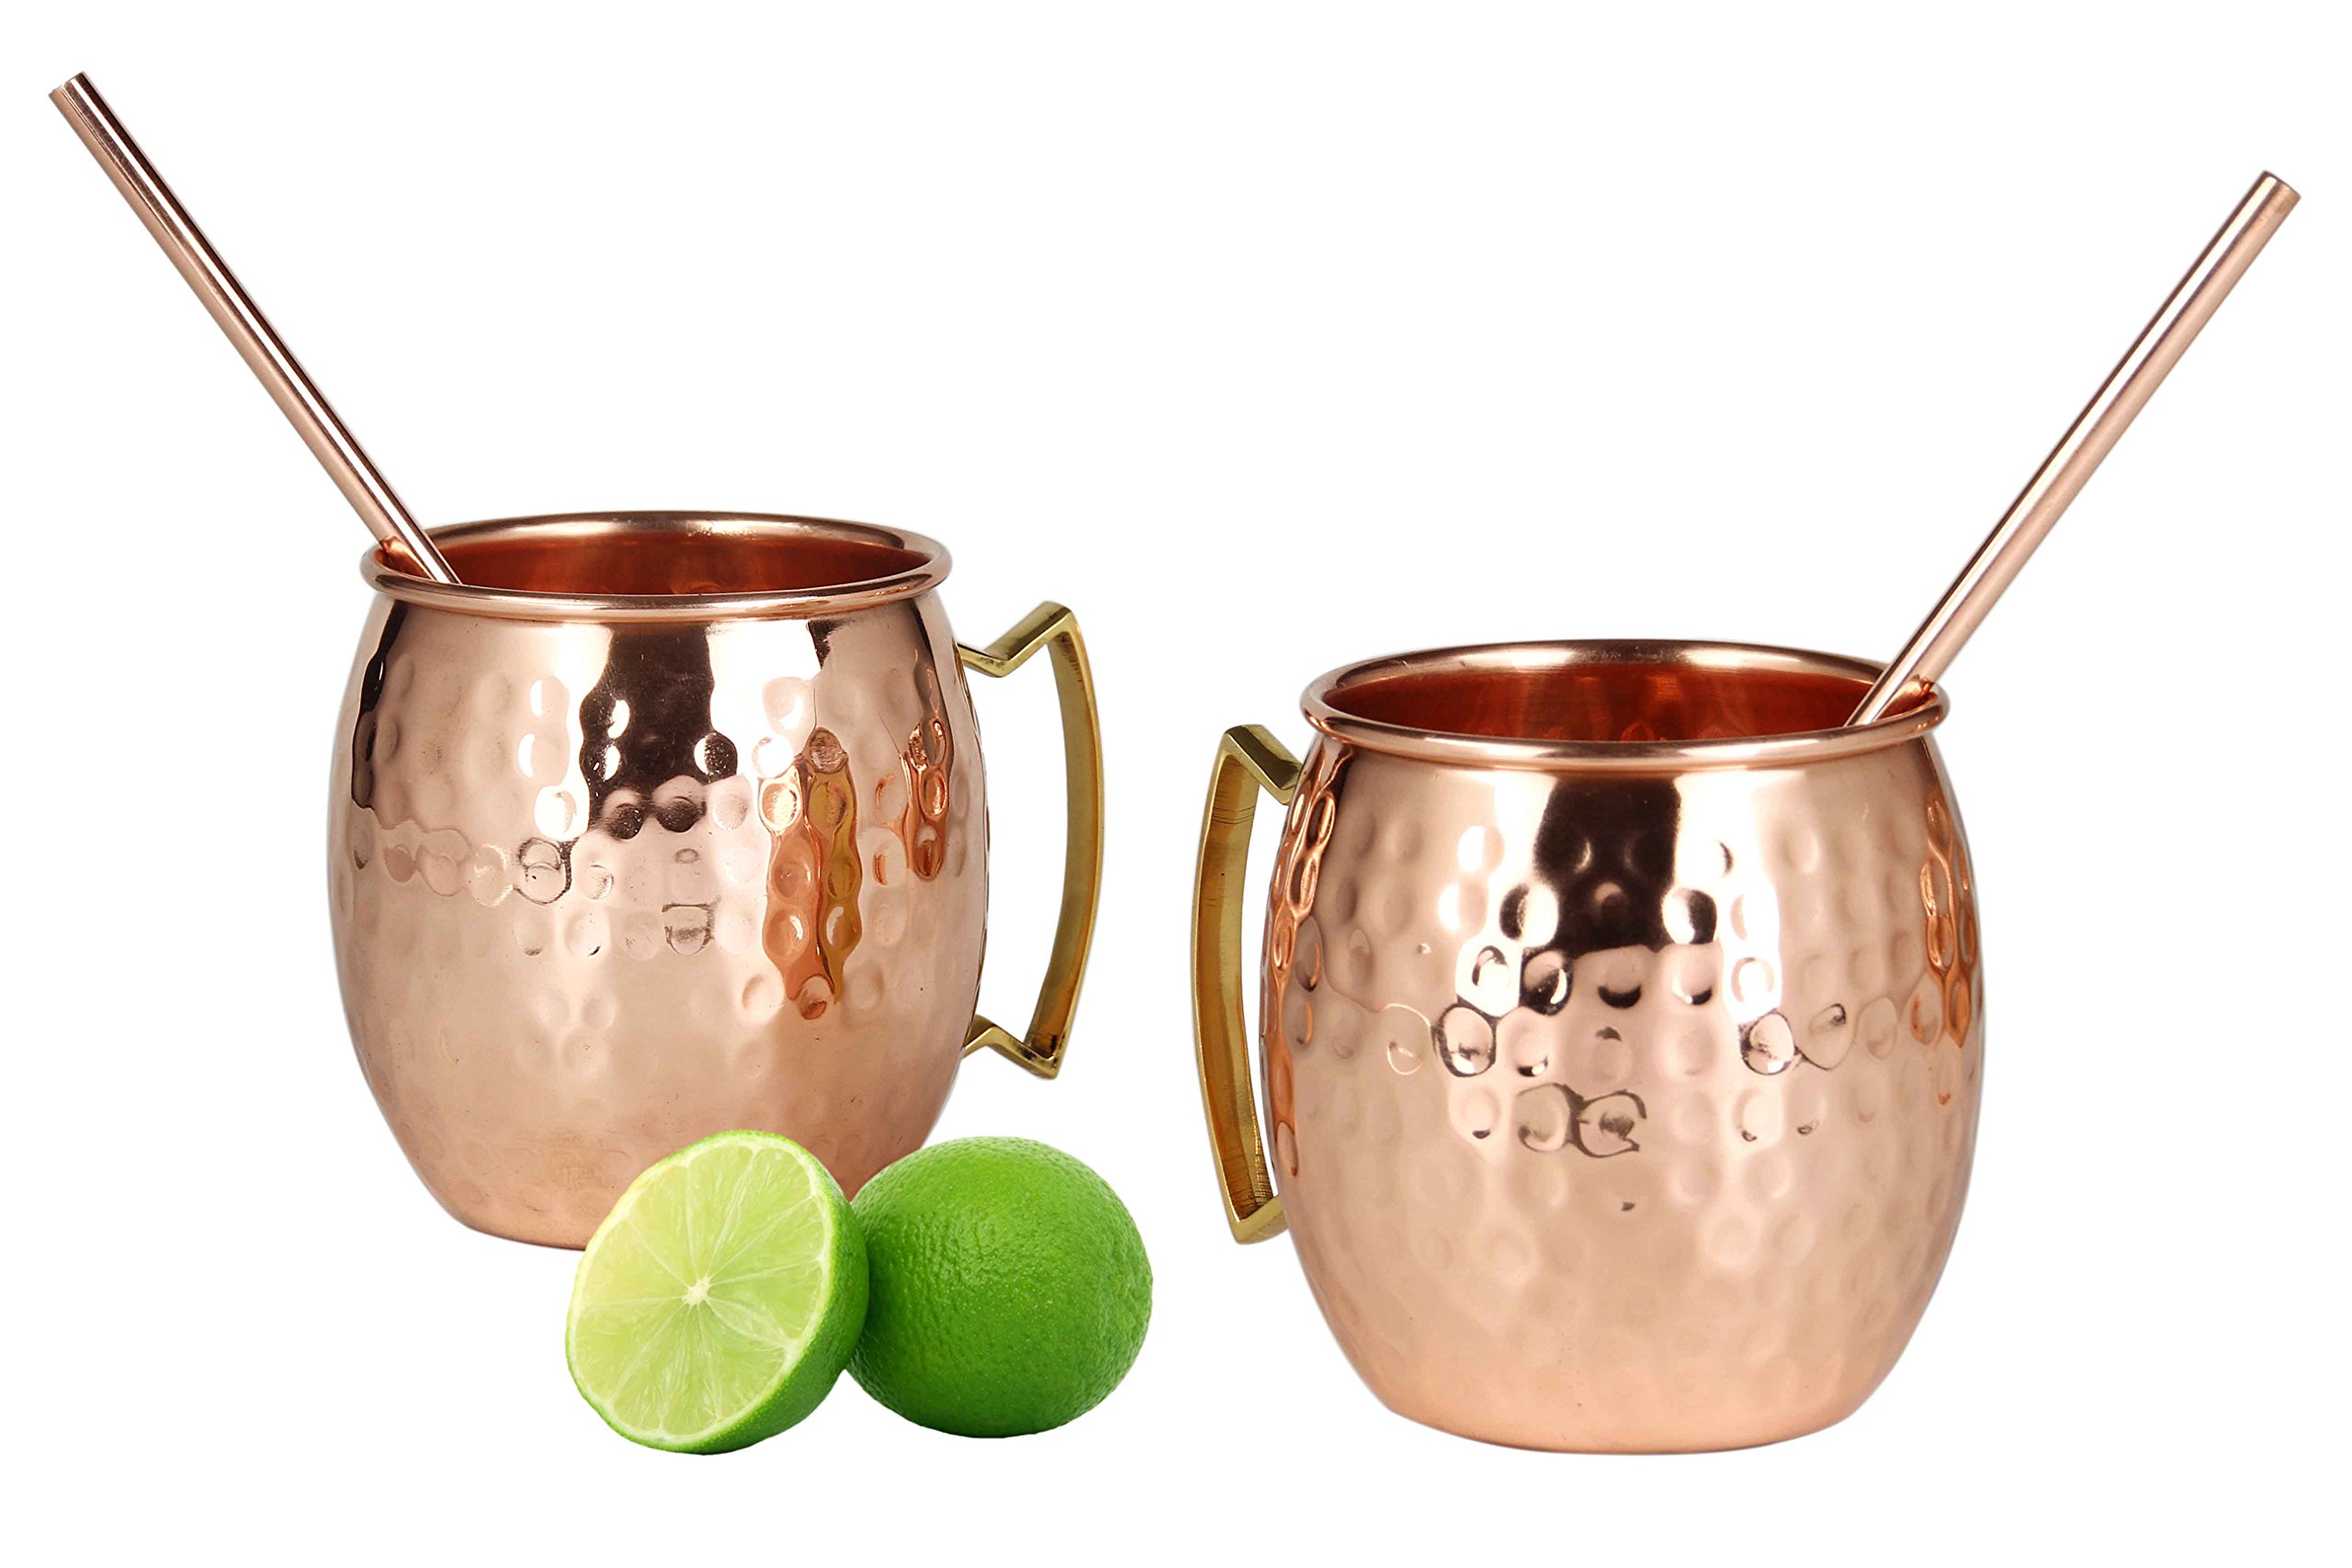 COPPER BAR COCKTAILS 29 Moscow Mule 100% Solid Pure Copper Mug/Cup (16-Ounce/Set of 2, Hammered)